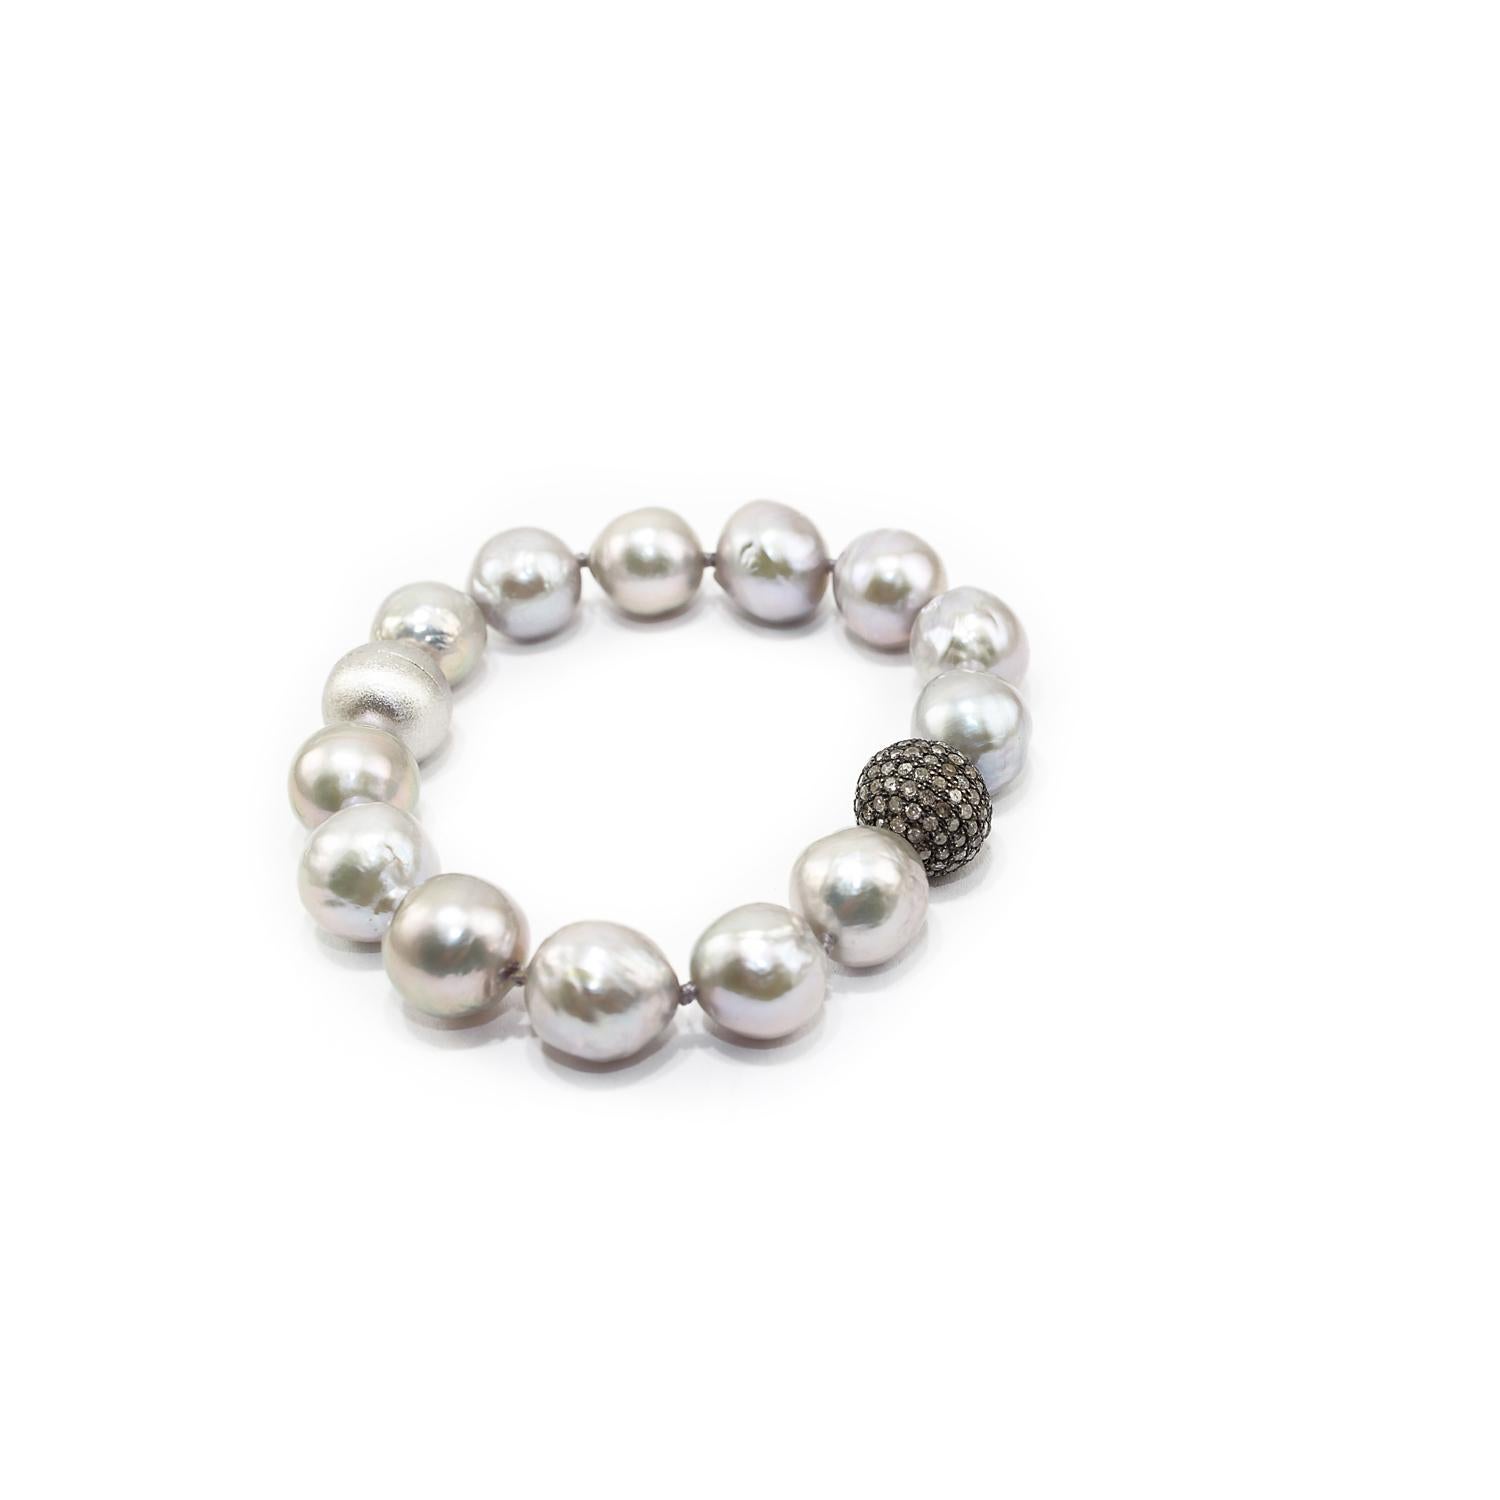 Nice bracelet made up of ice diamonds pave on silver setting, baroque grey pearls and 925 satin silver clasp. 
Ice diamonds pave ct. 2,24
Baroque grey pearls
925 satin silver clasp (magnet system)
Total lenght (including clasp) is cm 19